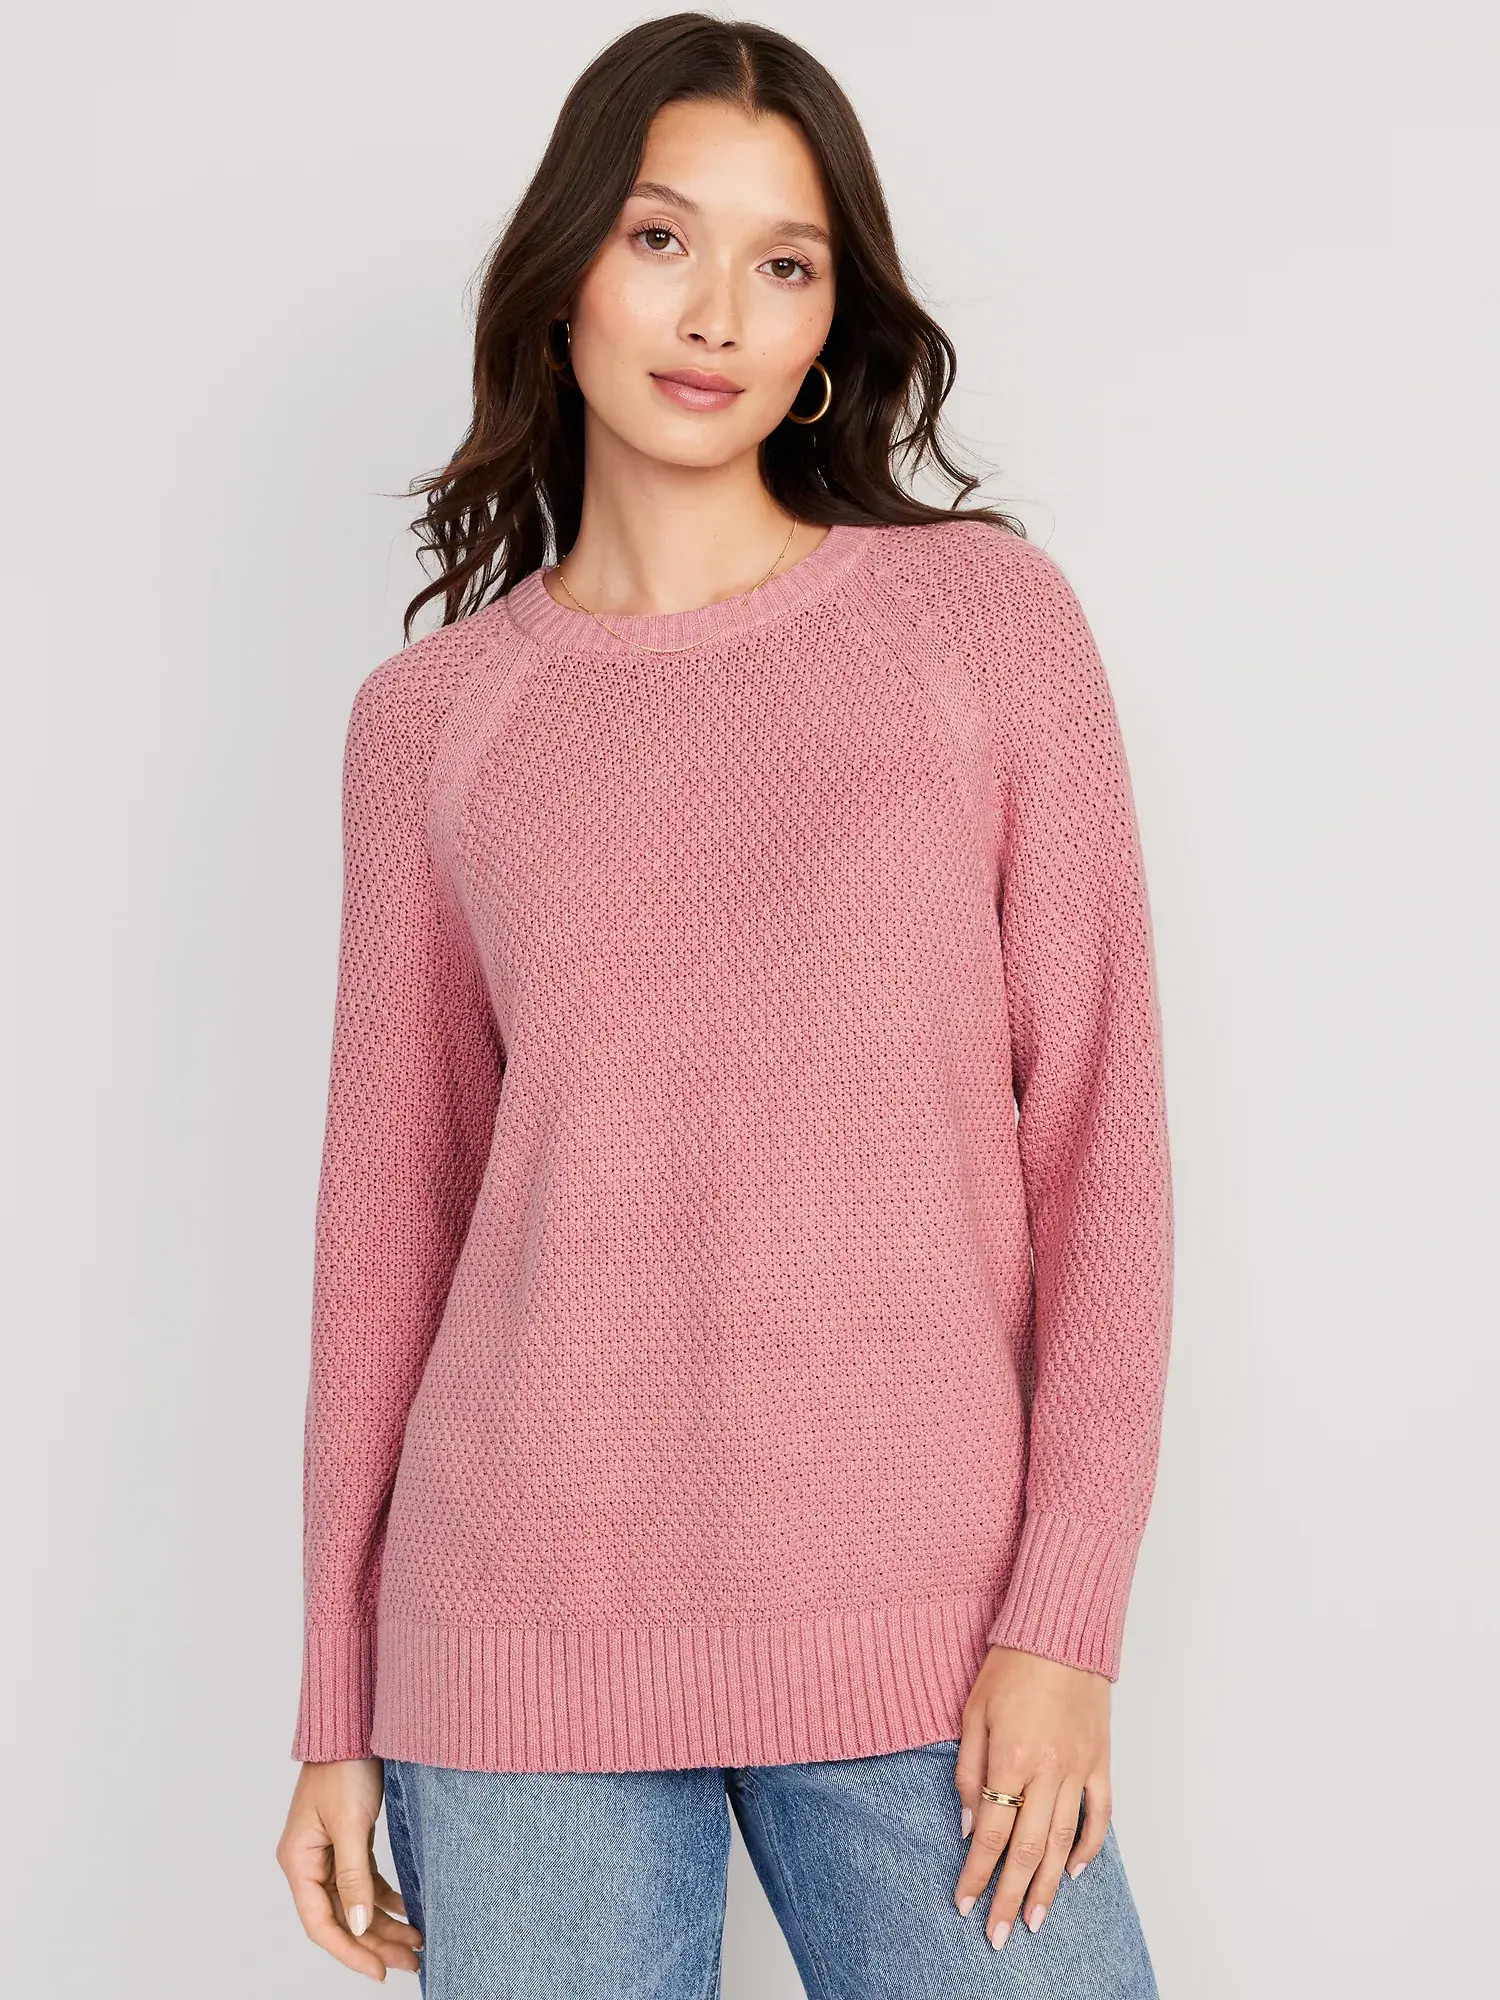 Old Navy Textured Pullover Tunic Sweater for Women pink. 1